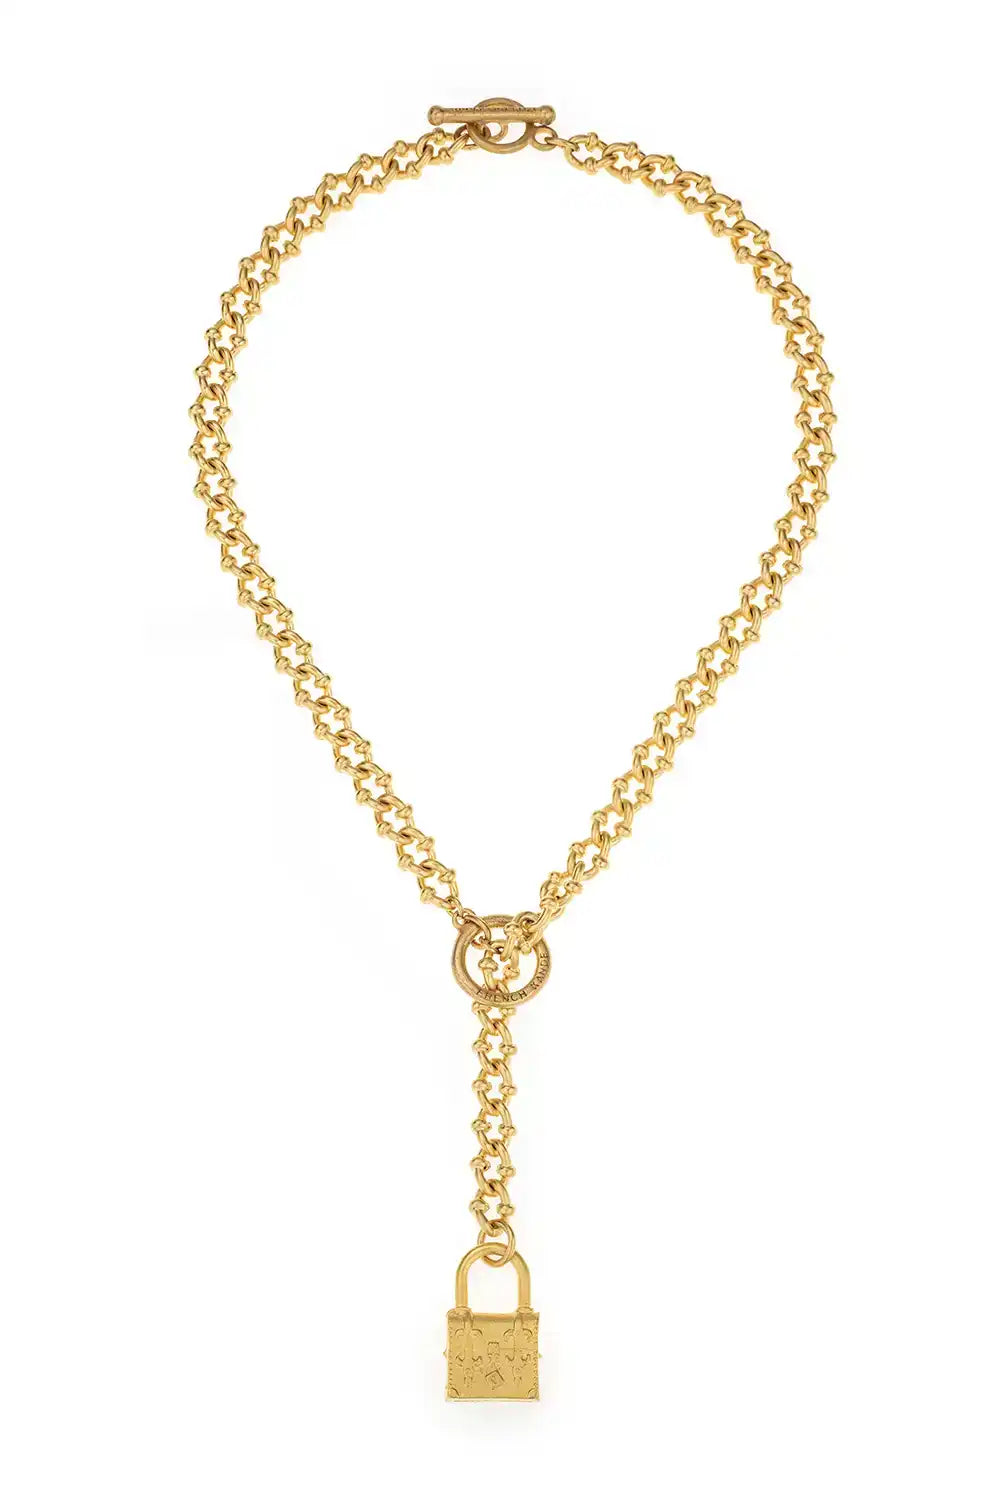 The Noele Necklace